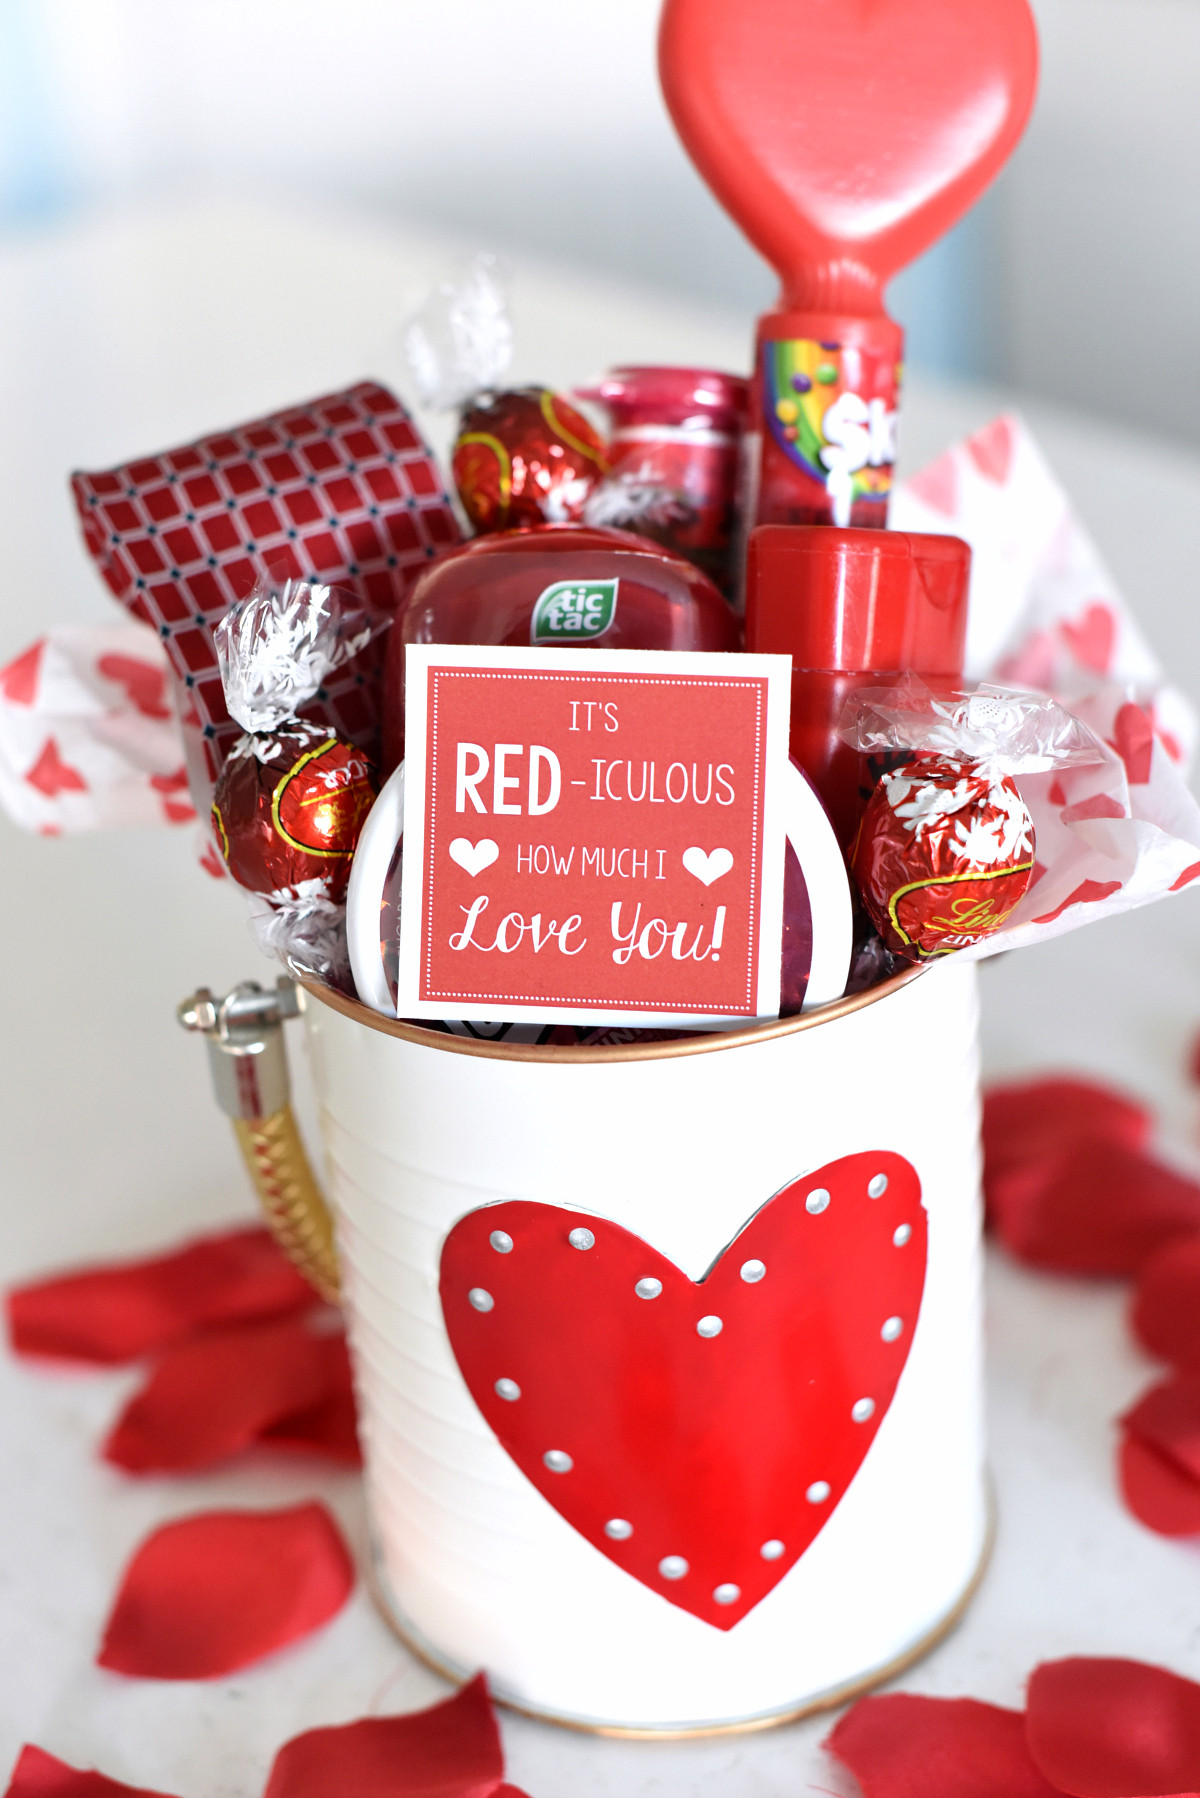 Valentines Day Gift Ideas For Guys
 Cute Valentine s Day Gift Idea RED iculous Basket